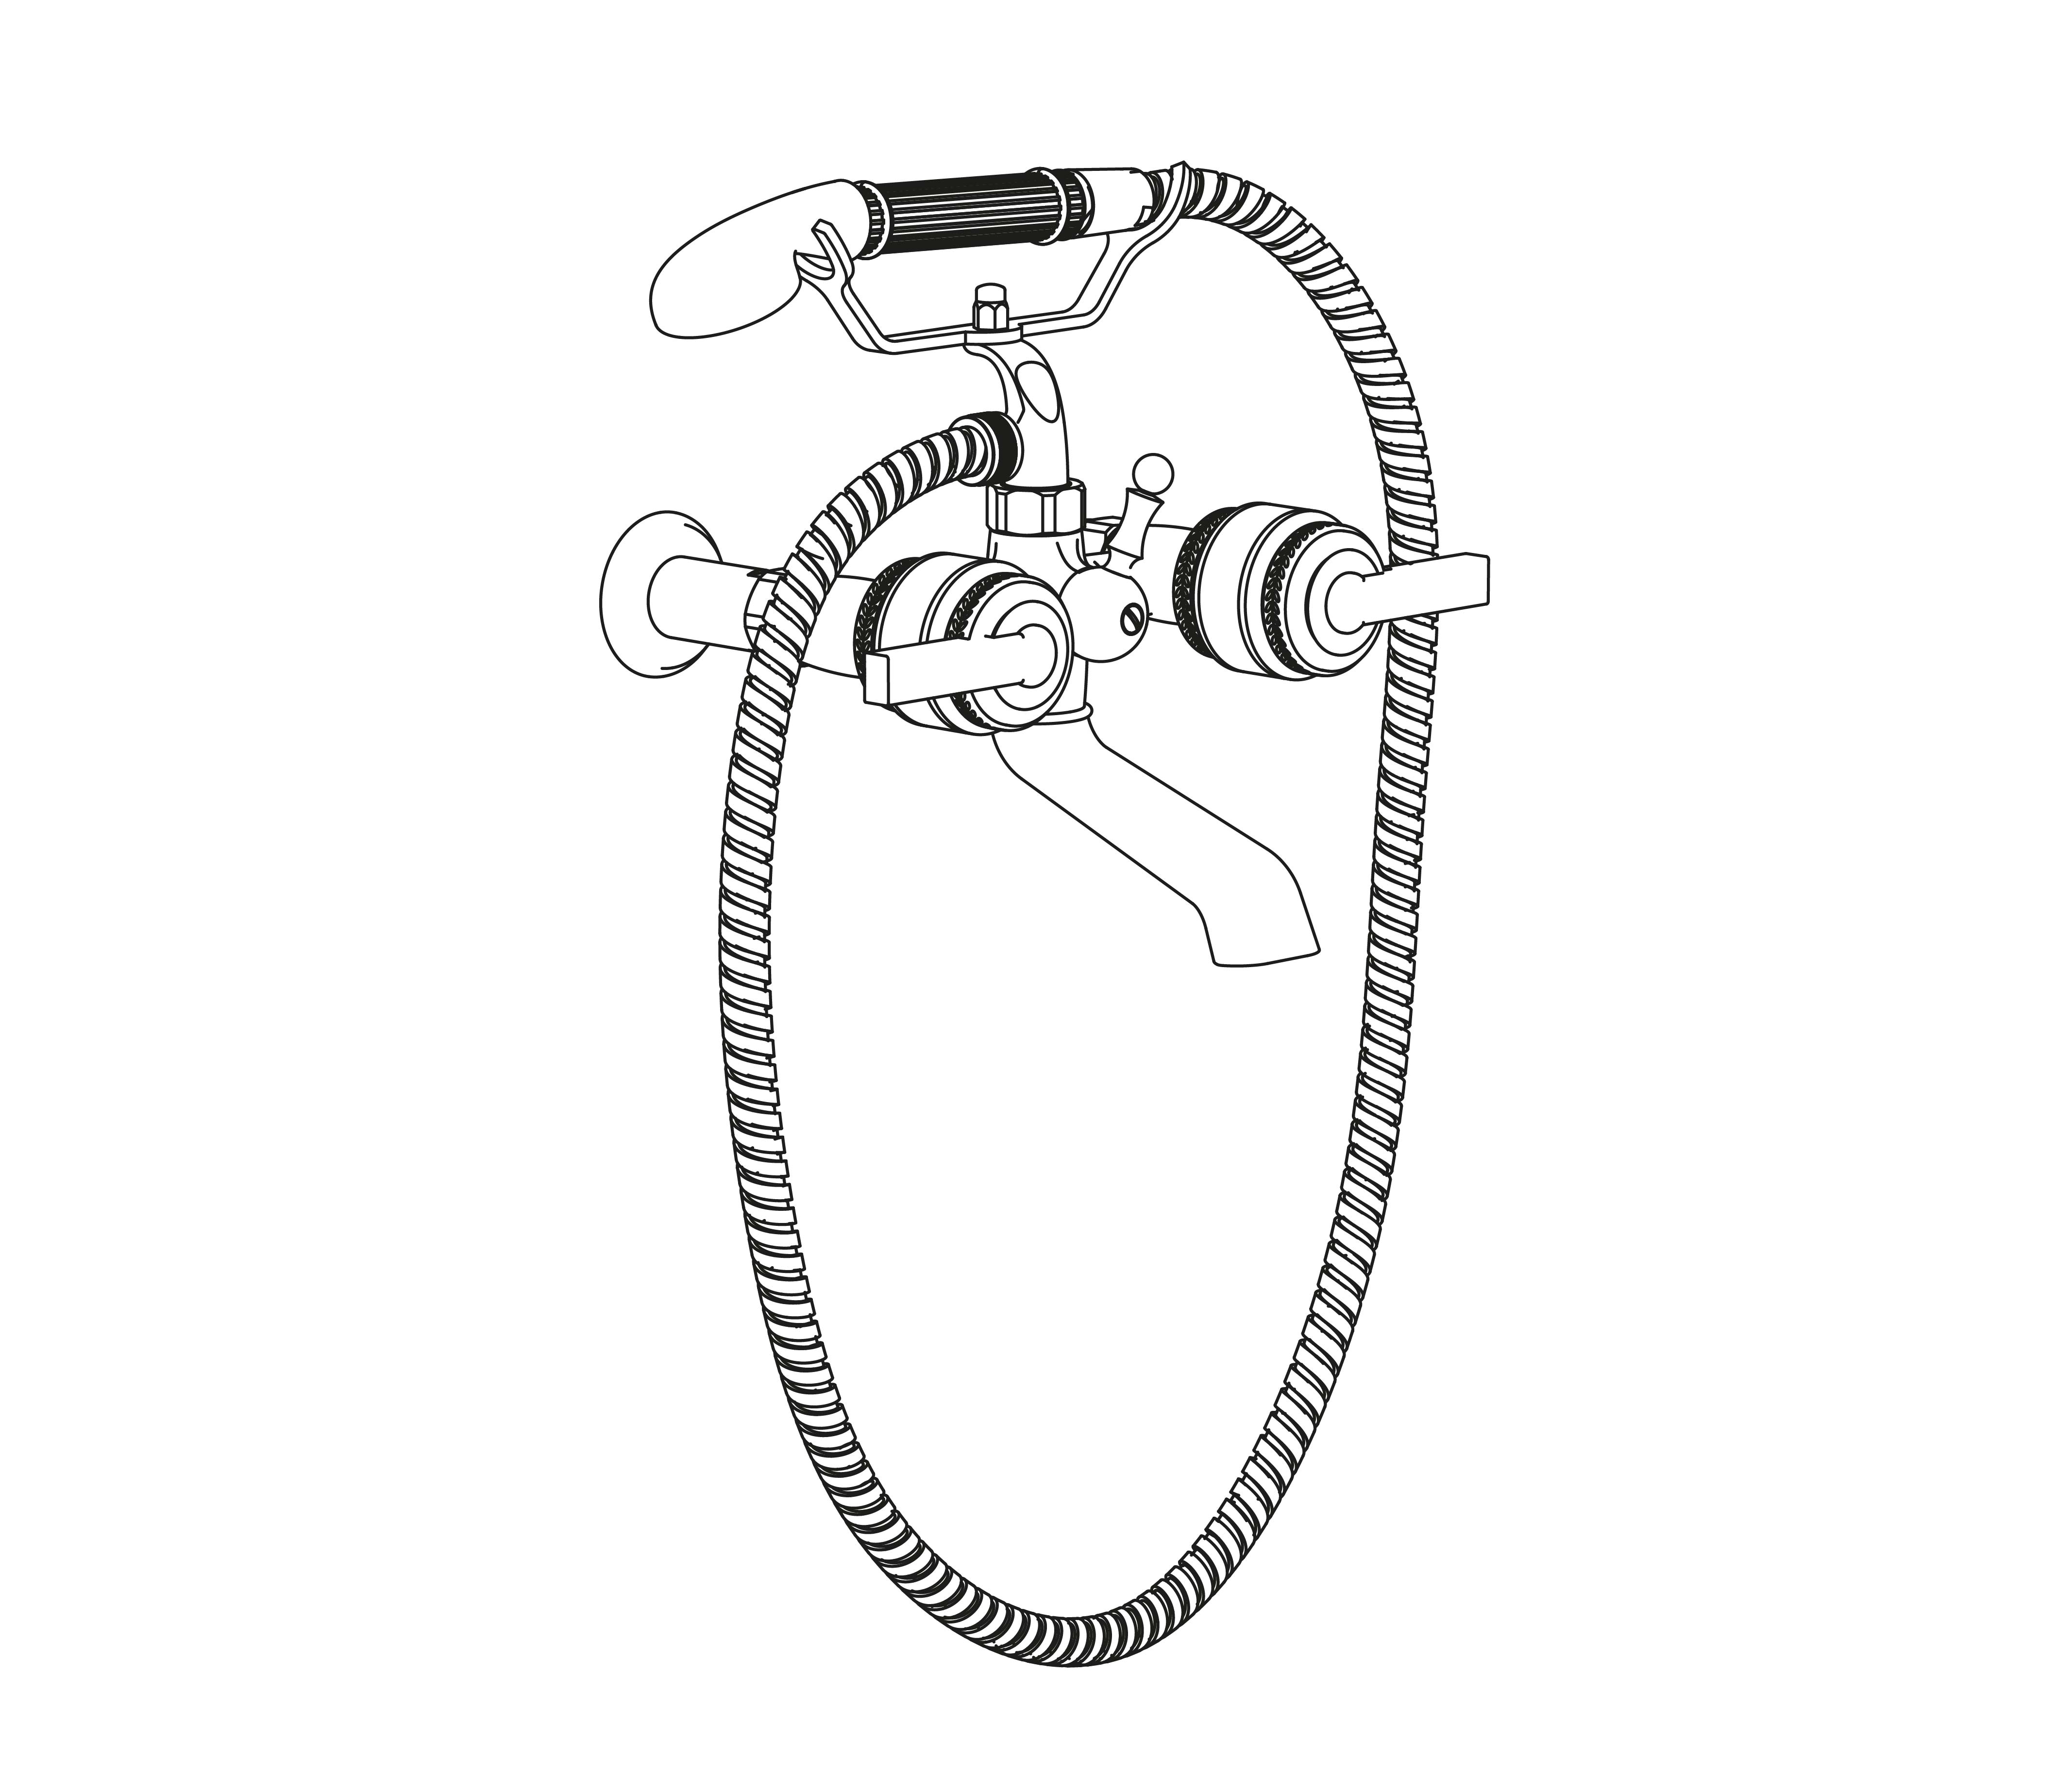 S151-3201 Wall mounted bath and shower mixer